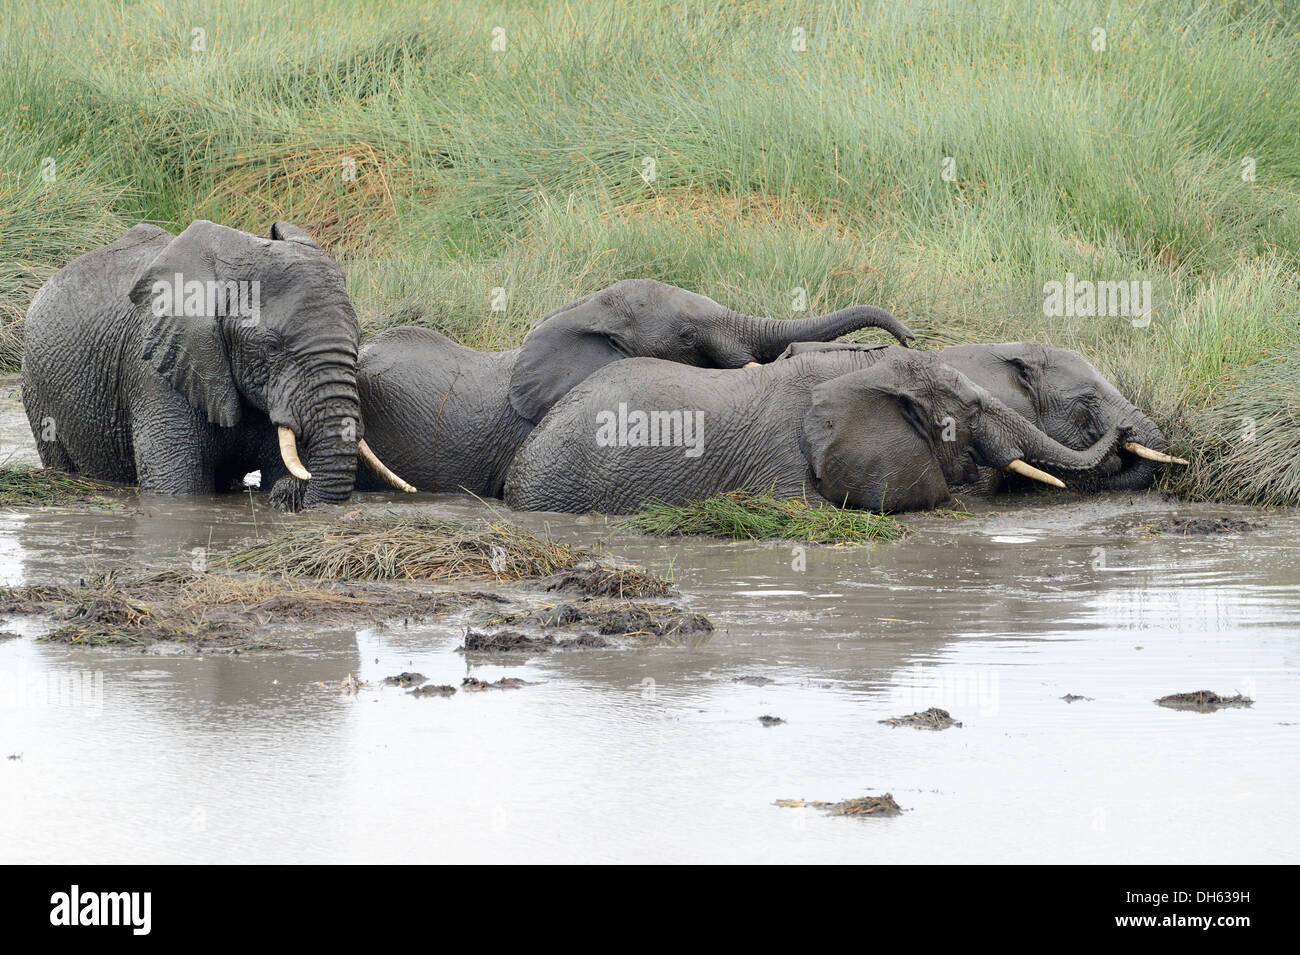 Young elephants playing in a water pool. Stock Photo